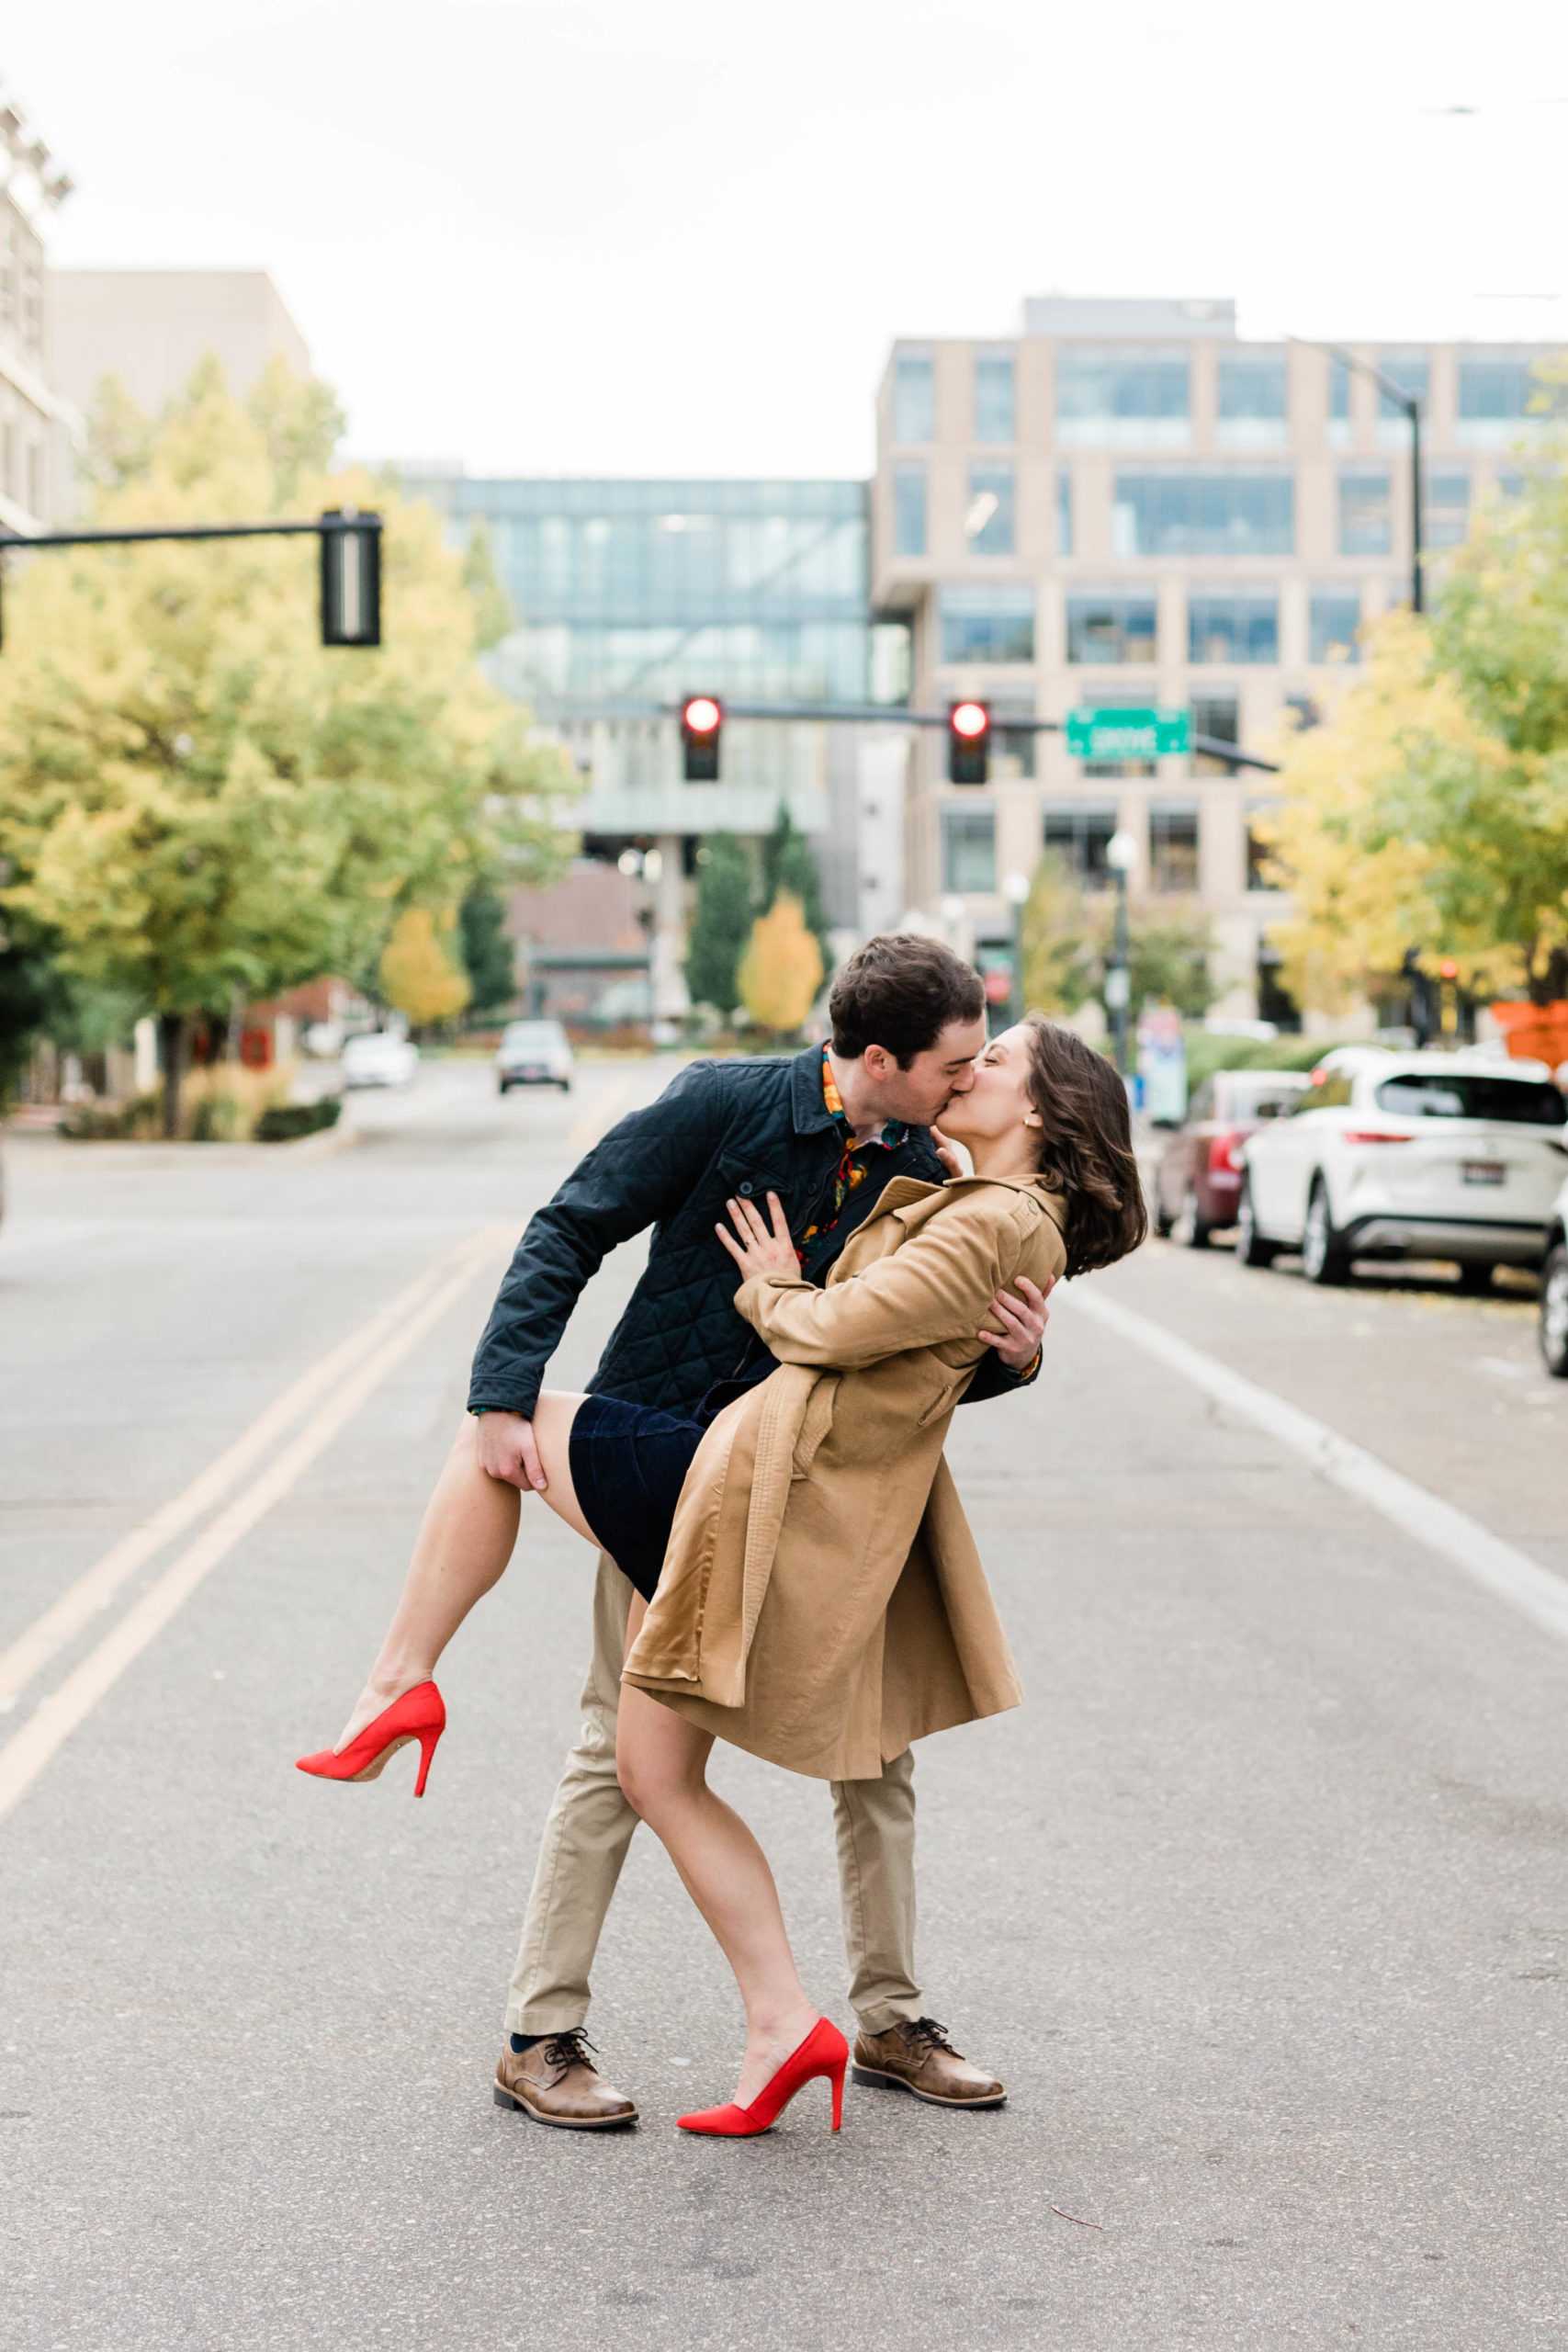 Boise wedding photographer captures engaged couple kissing in the streets